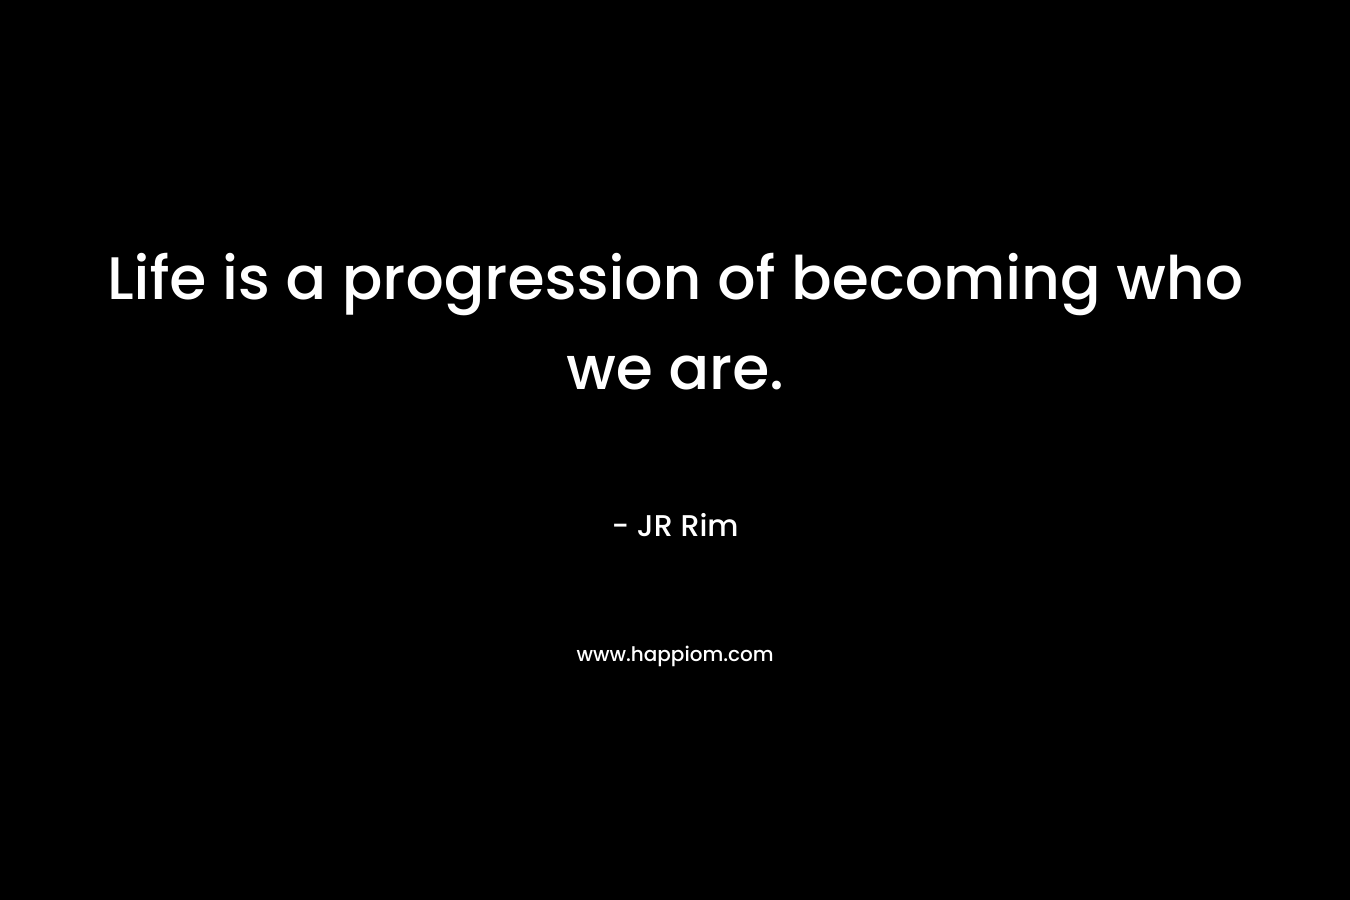 Life is a progression of becoming who we are.